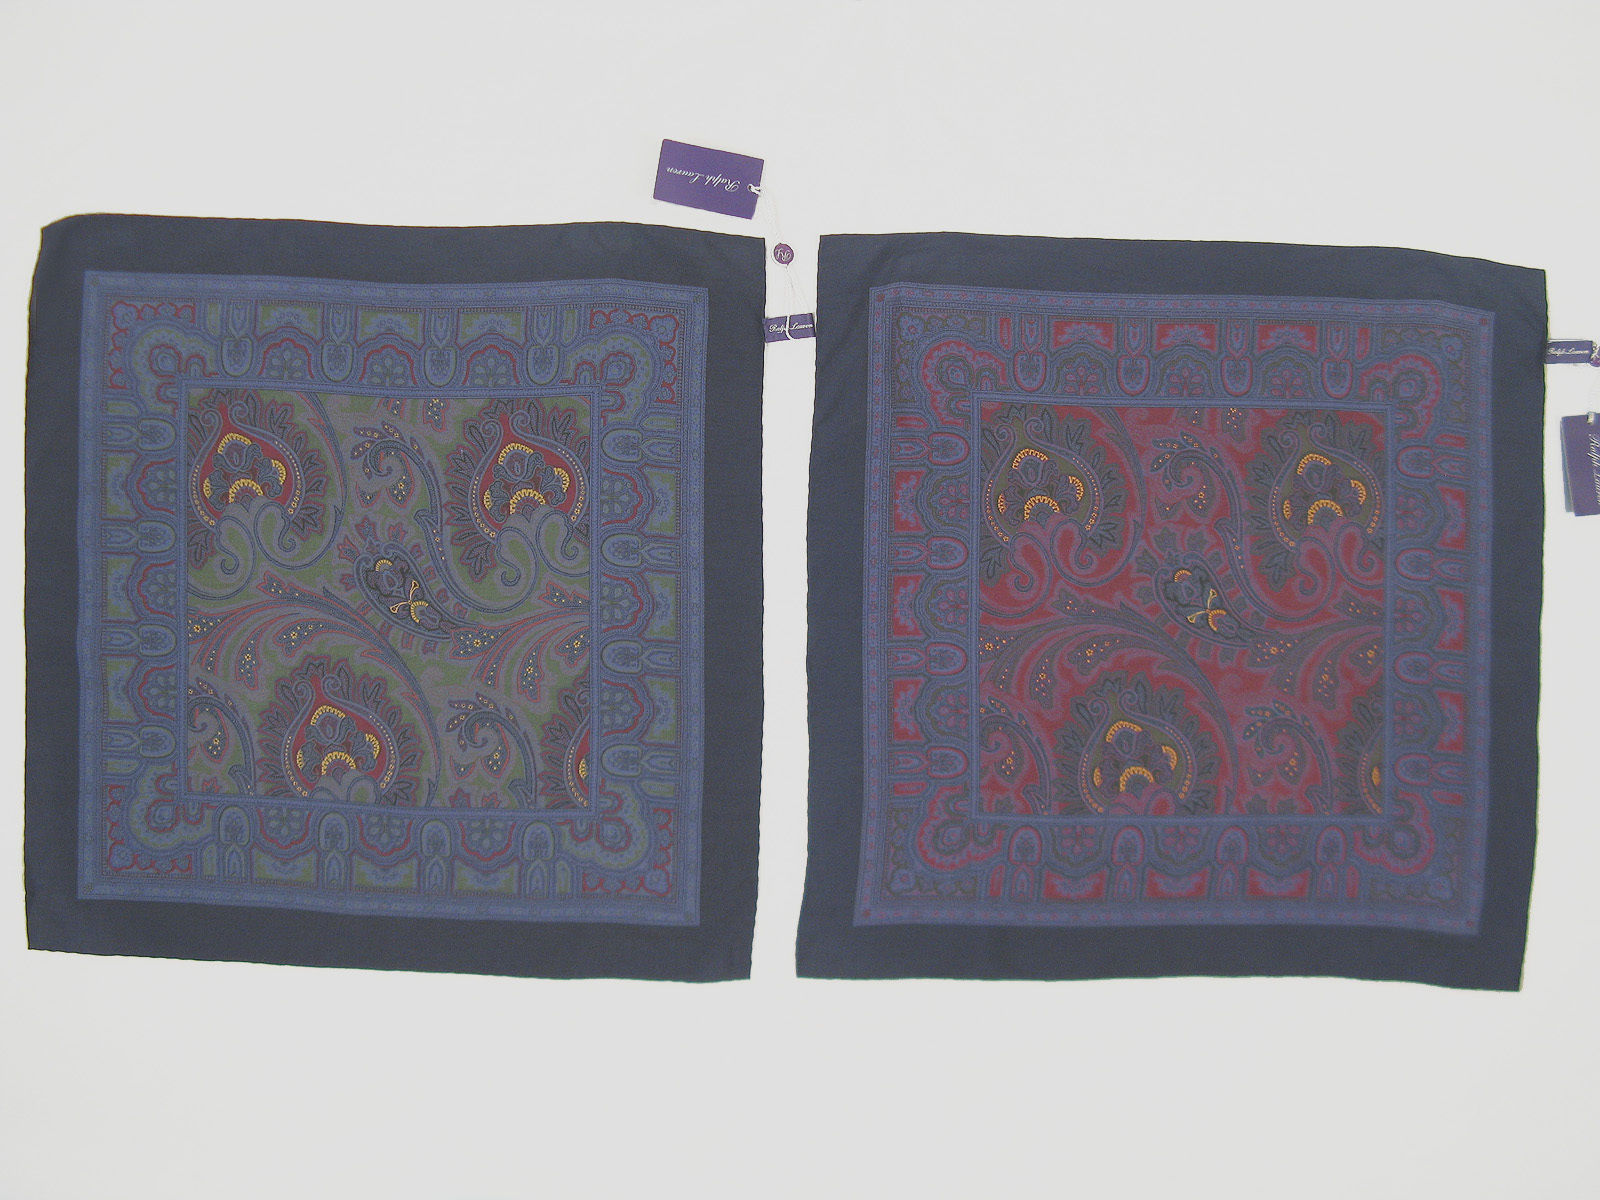 NEW Ralph Lauren Purple Label Silk Pocket Square!  *Made in Italy*  *2 Colors* - $69.99